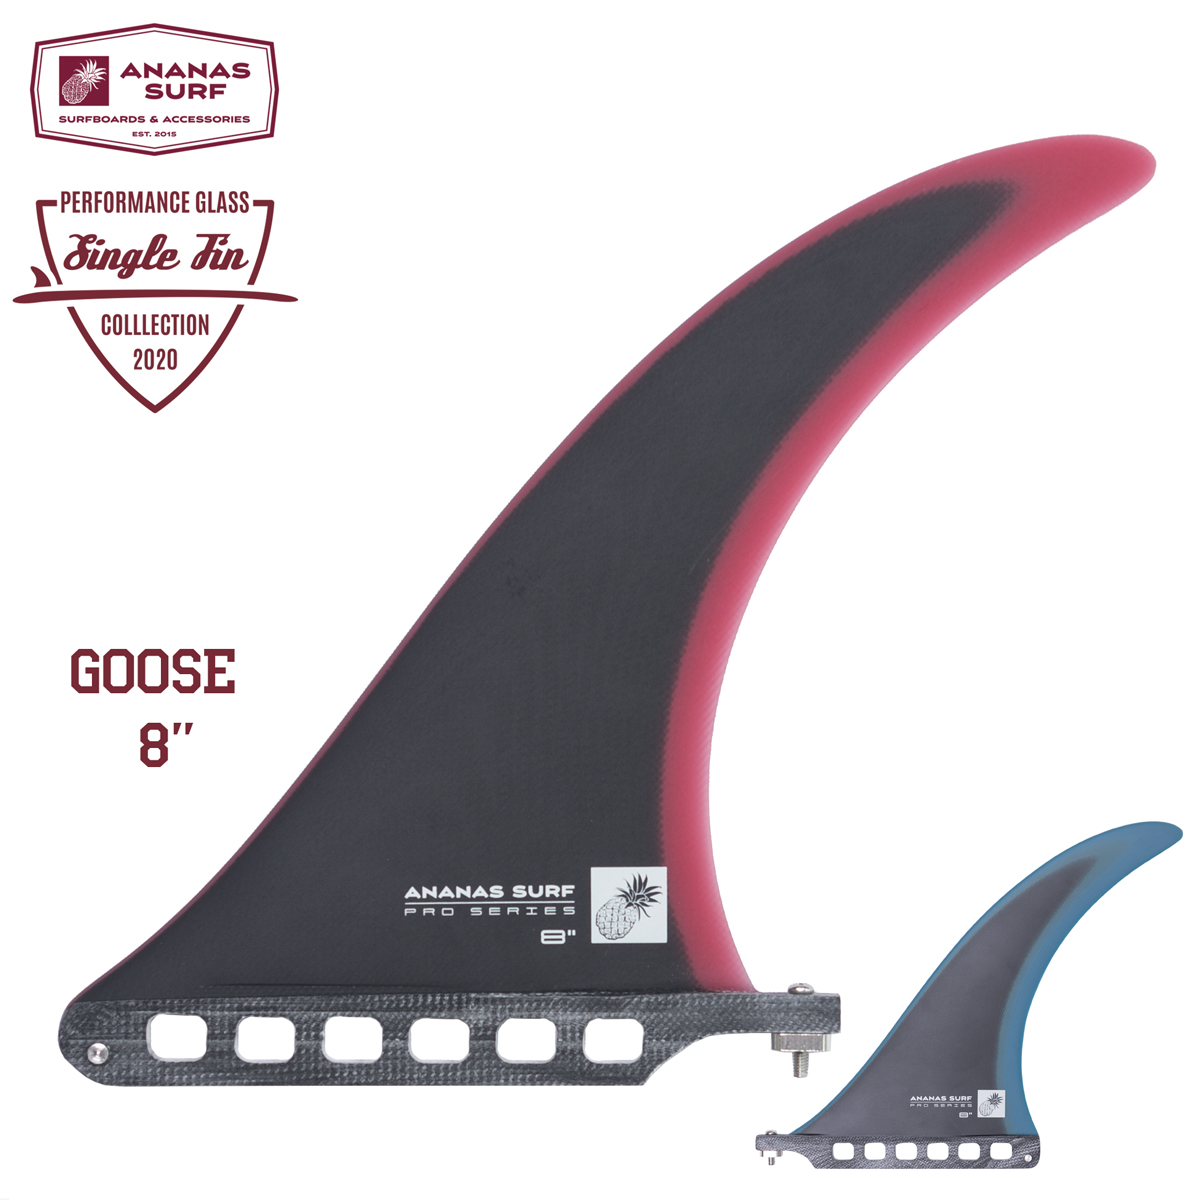 Ananas Surf Performance Glass Goose single fin 8 in